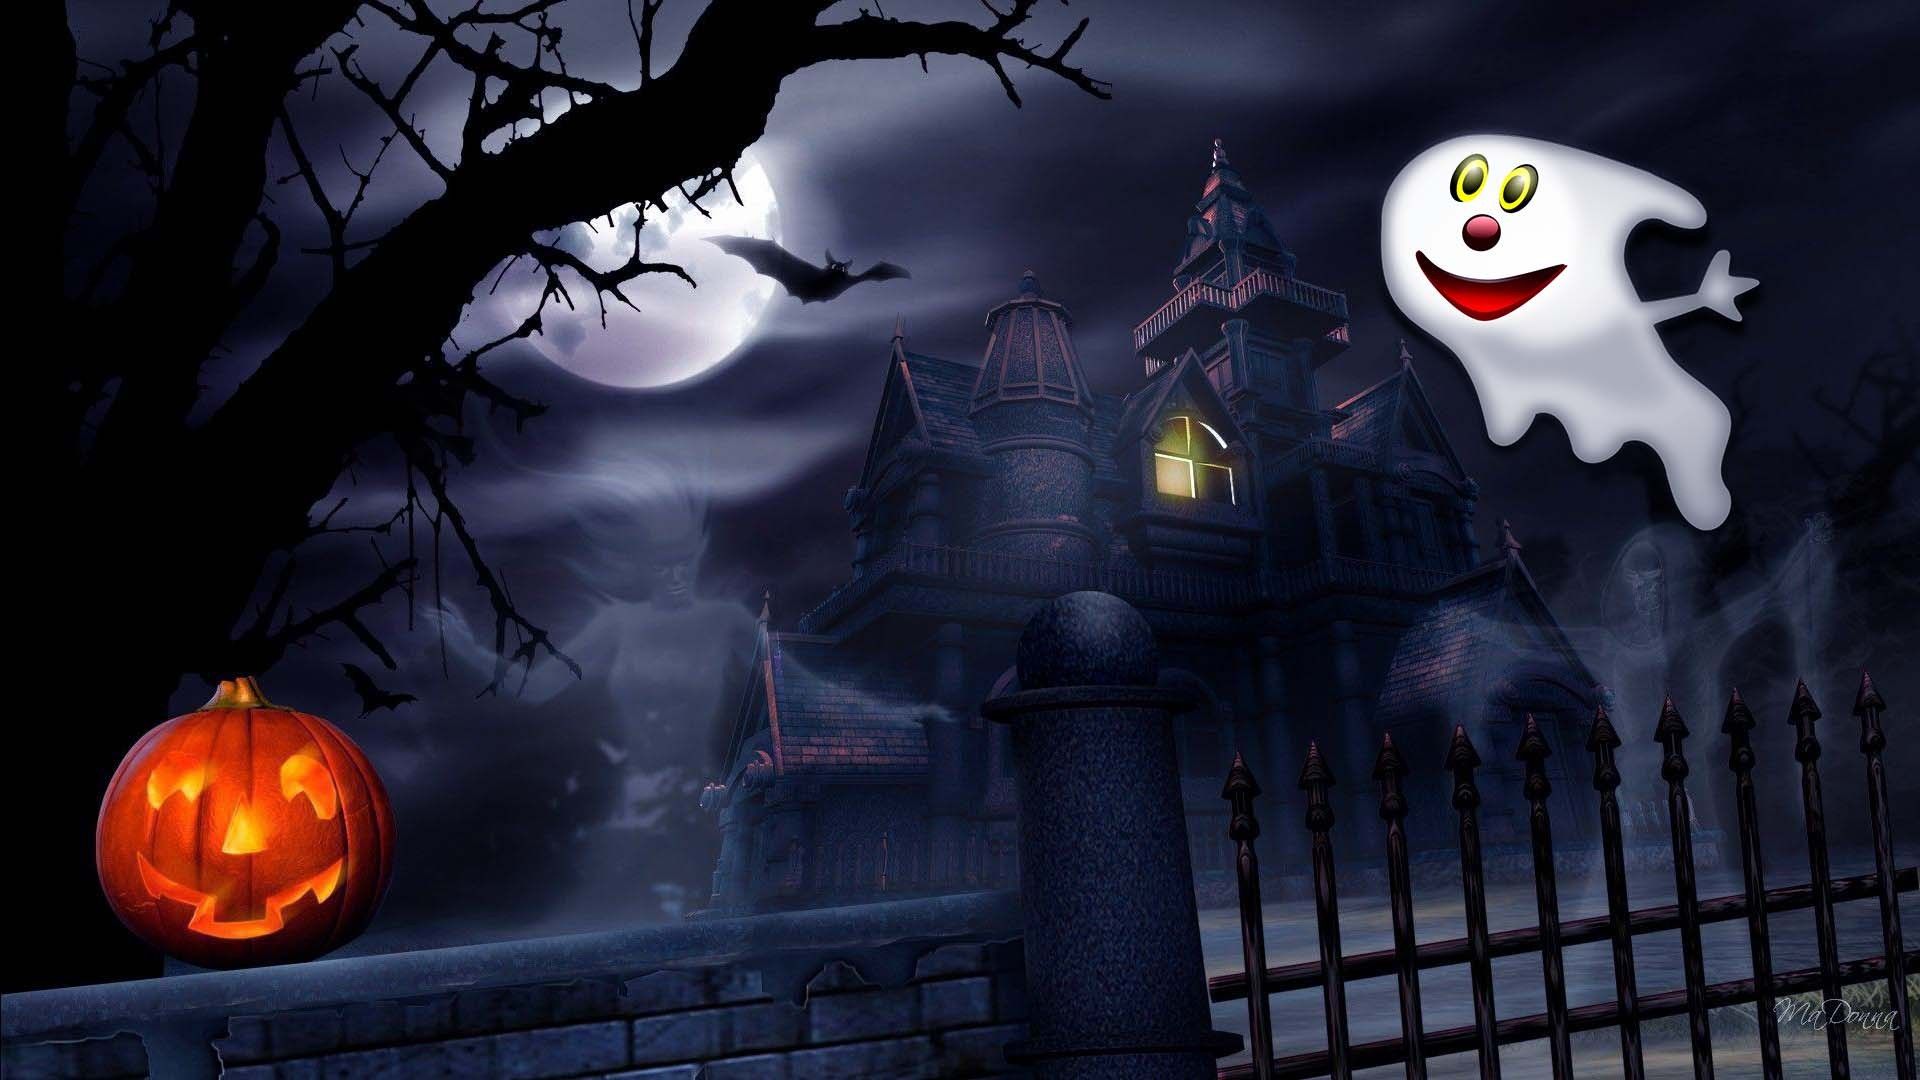 Halloween Ghost Wallpaper Android क लए APK डउनलड कर